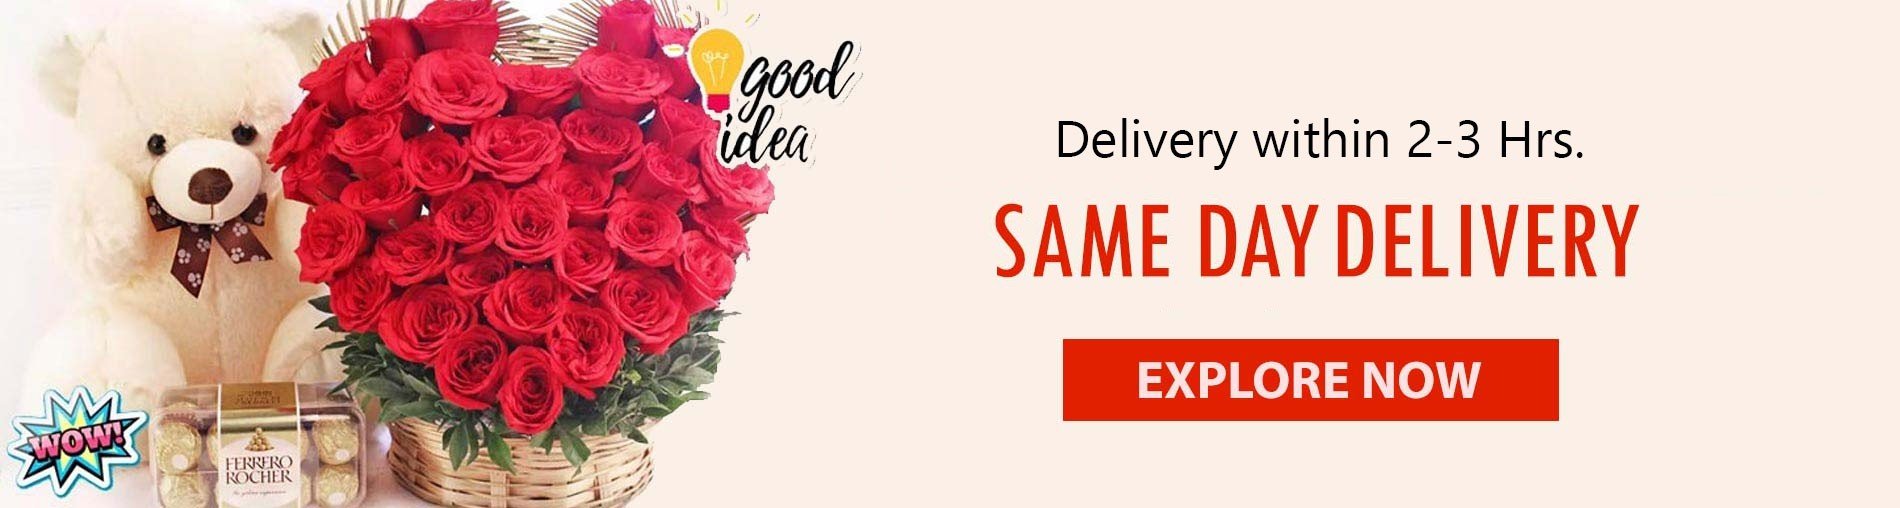 same day delivery gifts